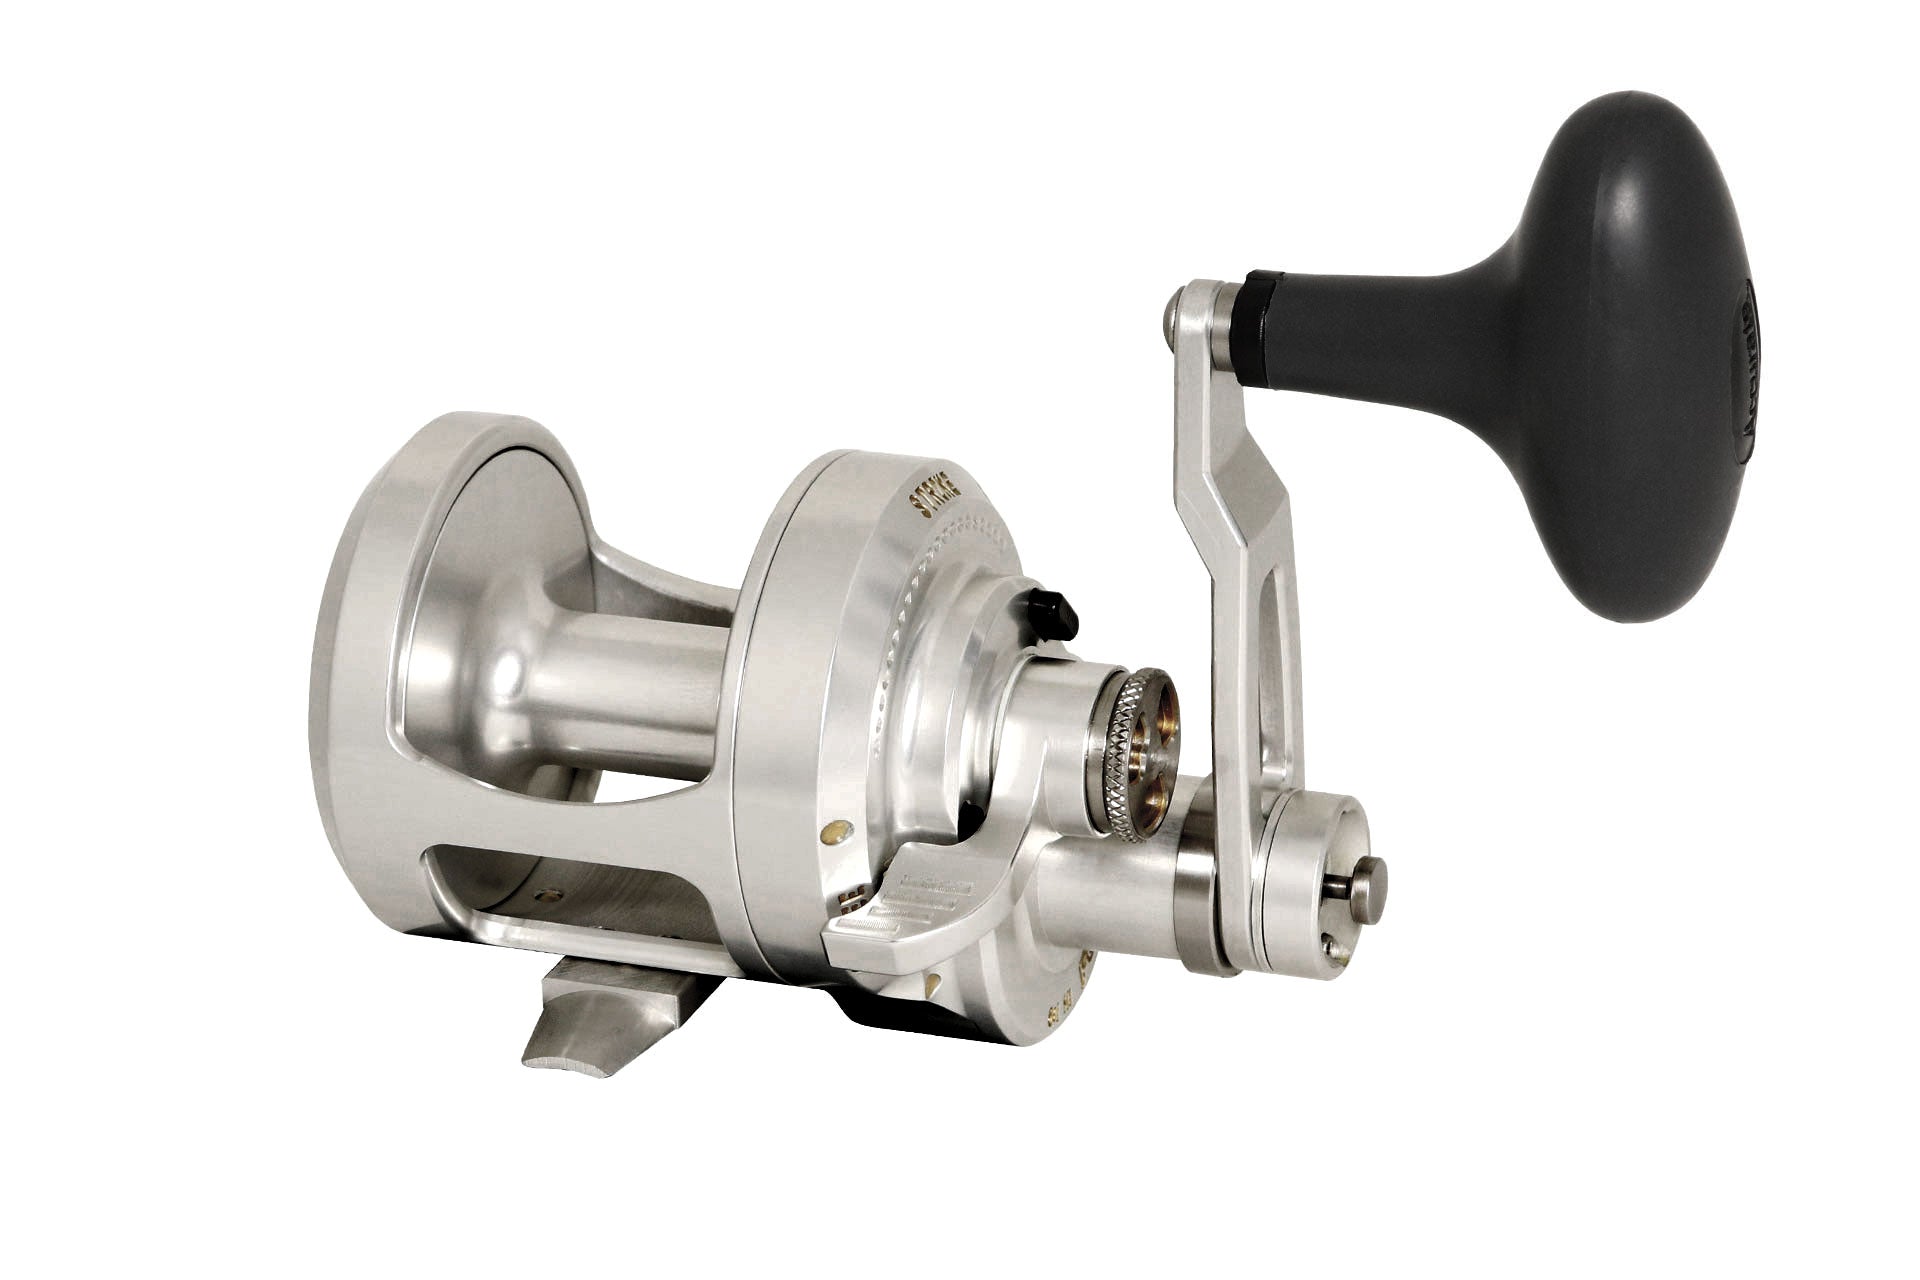 Accurate Boss Fury 600 lever drag fishing reel how to take apart and  service 